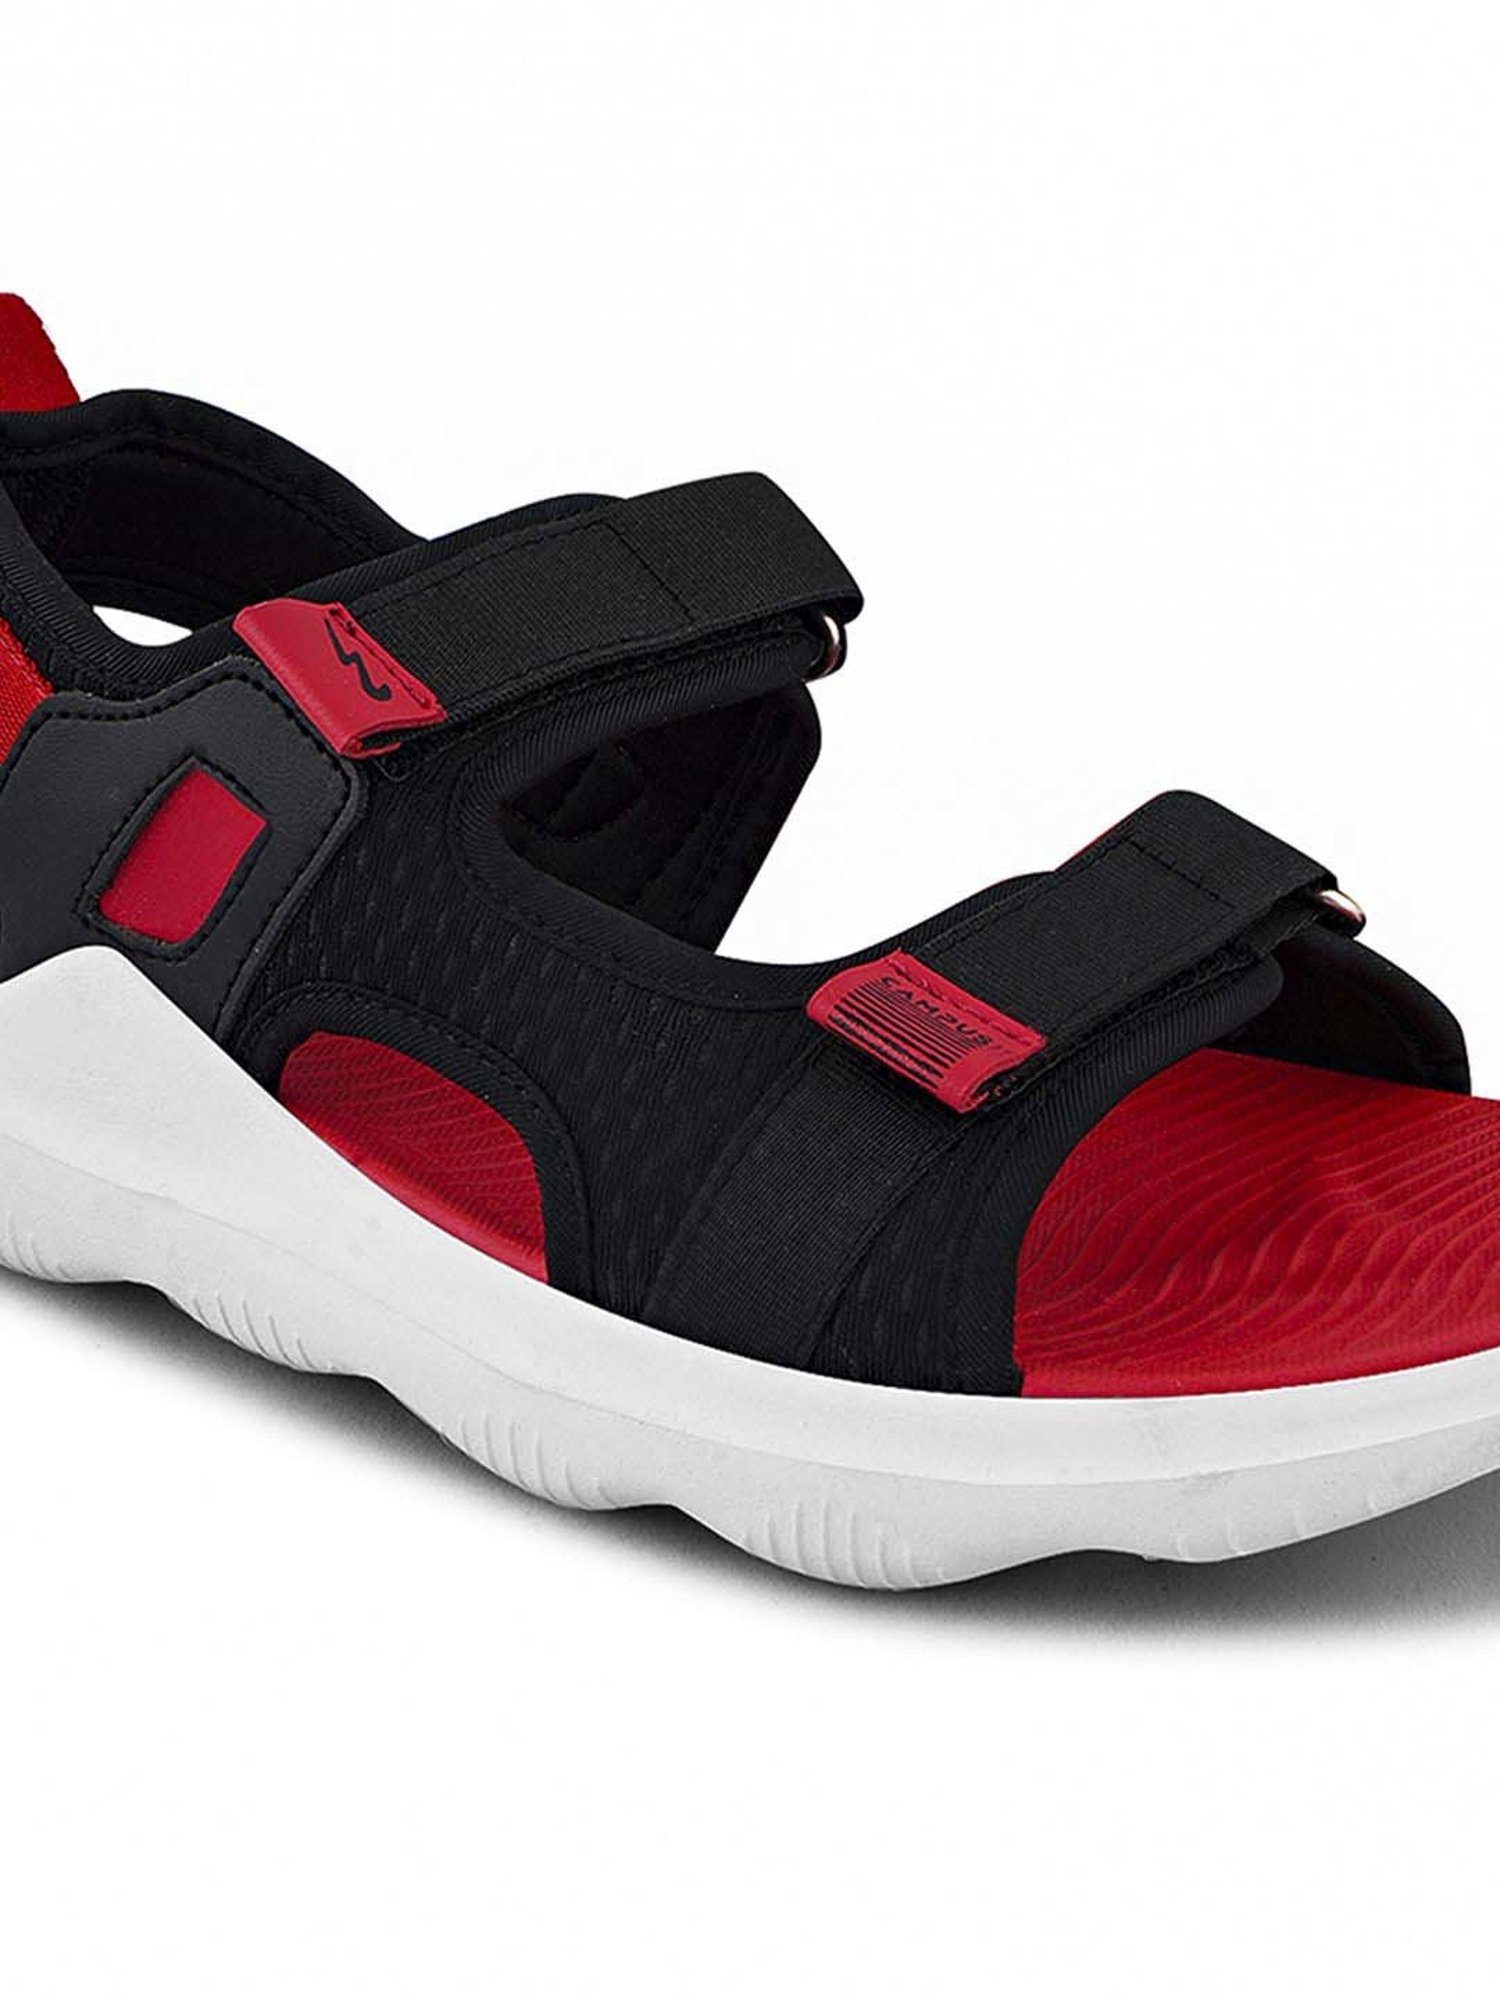 Buy Sandals For Men: Gc-22115-Blk-Red | Campus Shoes